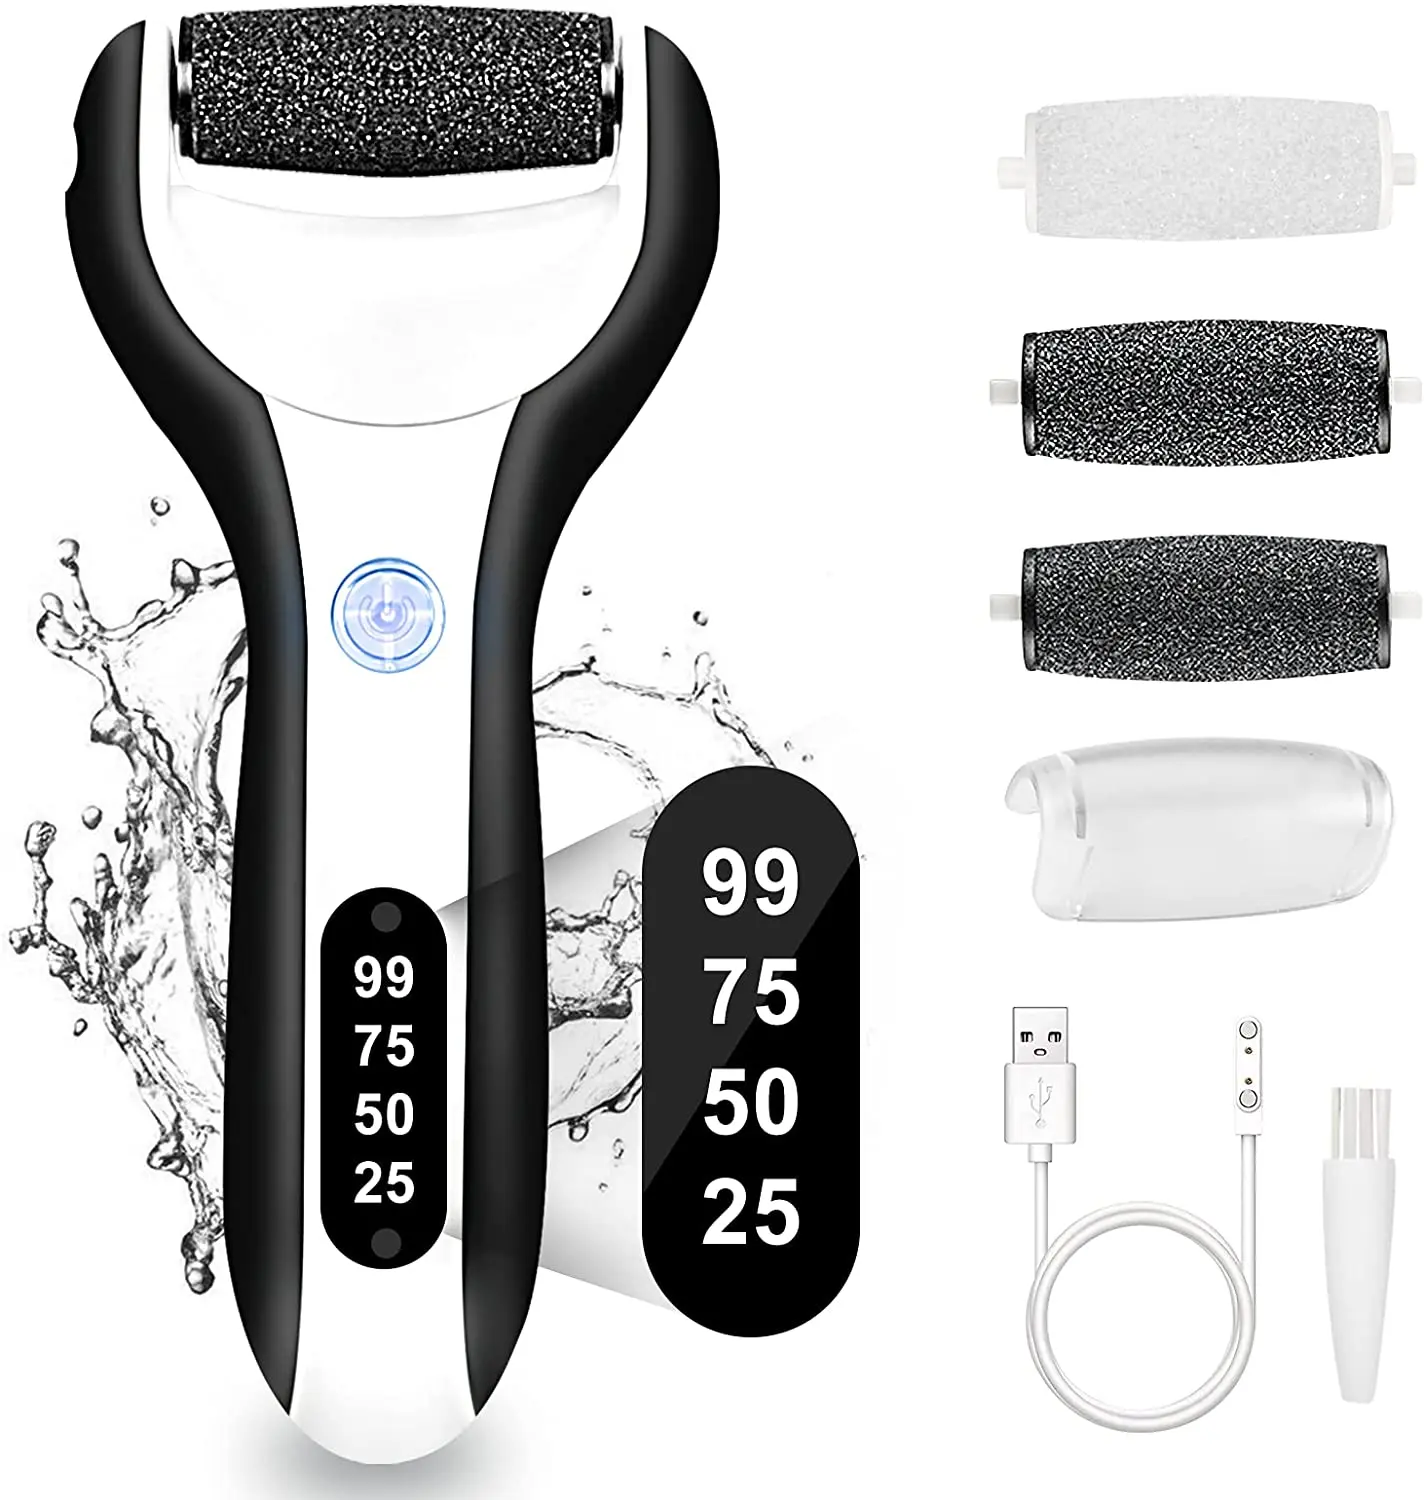 Rechargeable Electric Foot File Callus Remover Machine Pedicure Device Foot Care Tools Feet For Heels Remove Dead Skin black electric pedicure foot care tool files pedicure callus remover rechargeable saws file for feet dead skin callus peel remover